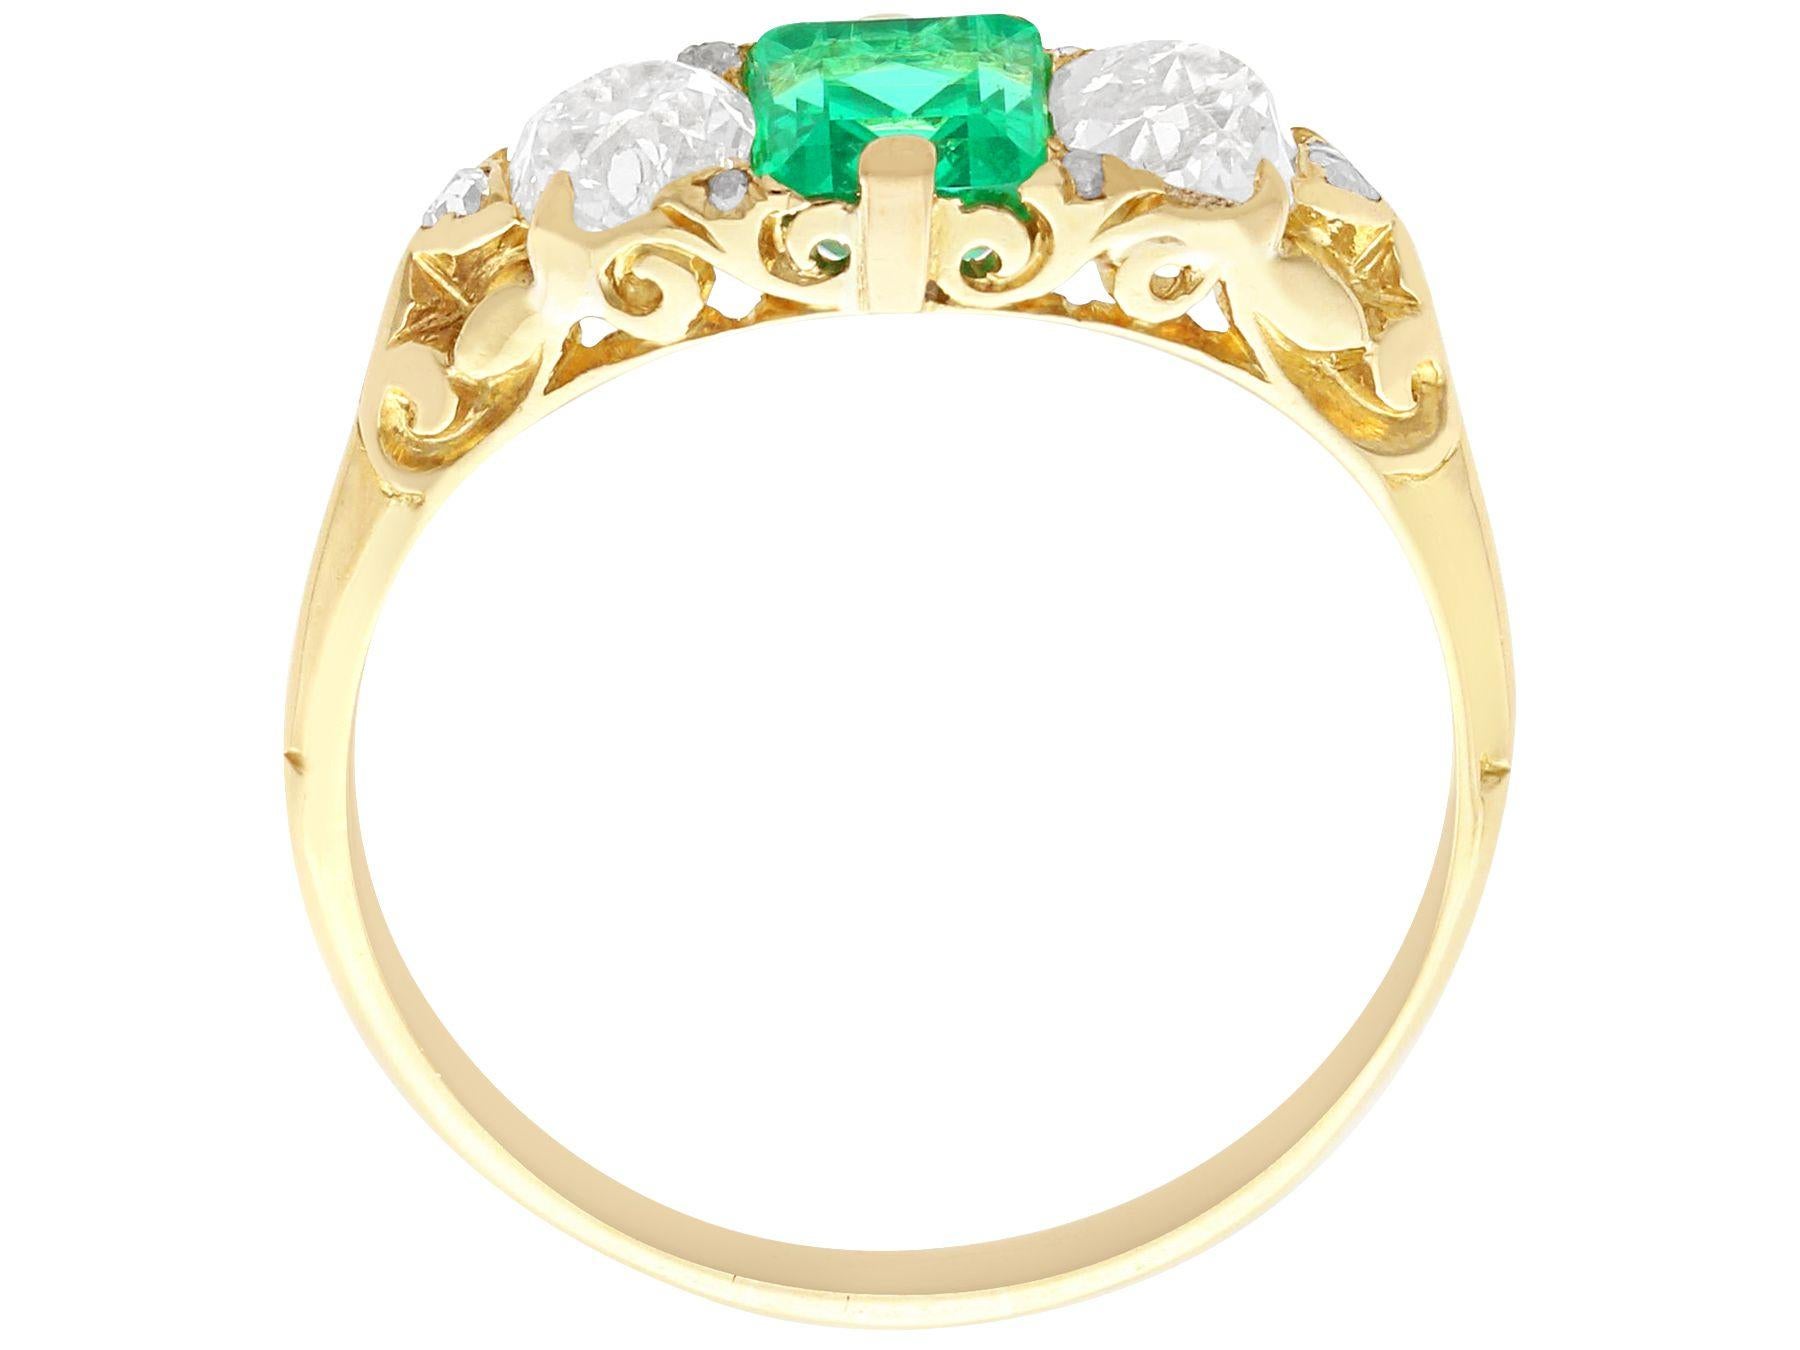 Women's or Men's Antique 0.64ct Emerald 0.79ct Diamond 18k Yellow Gold Trilogy Ring, circa 1920 For Sale